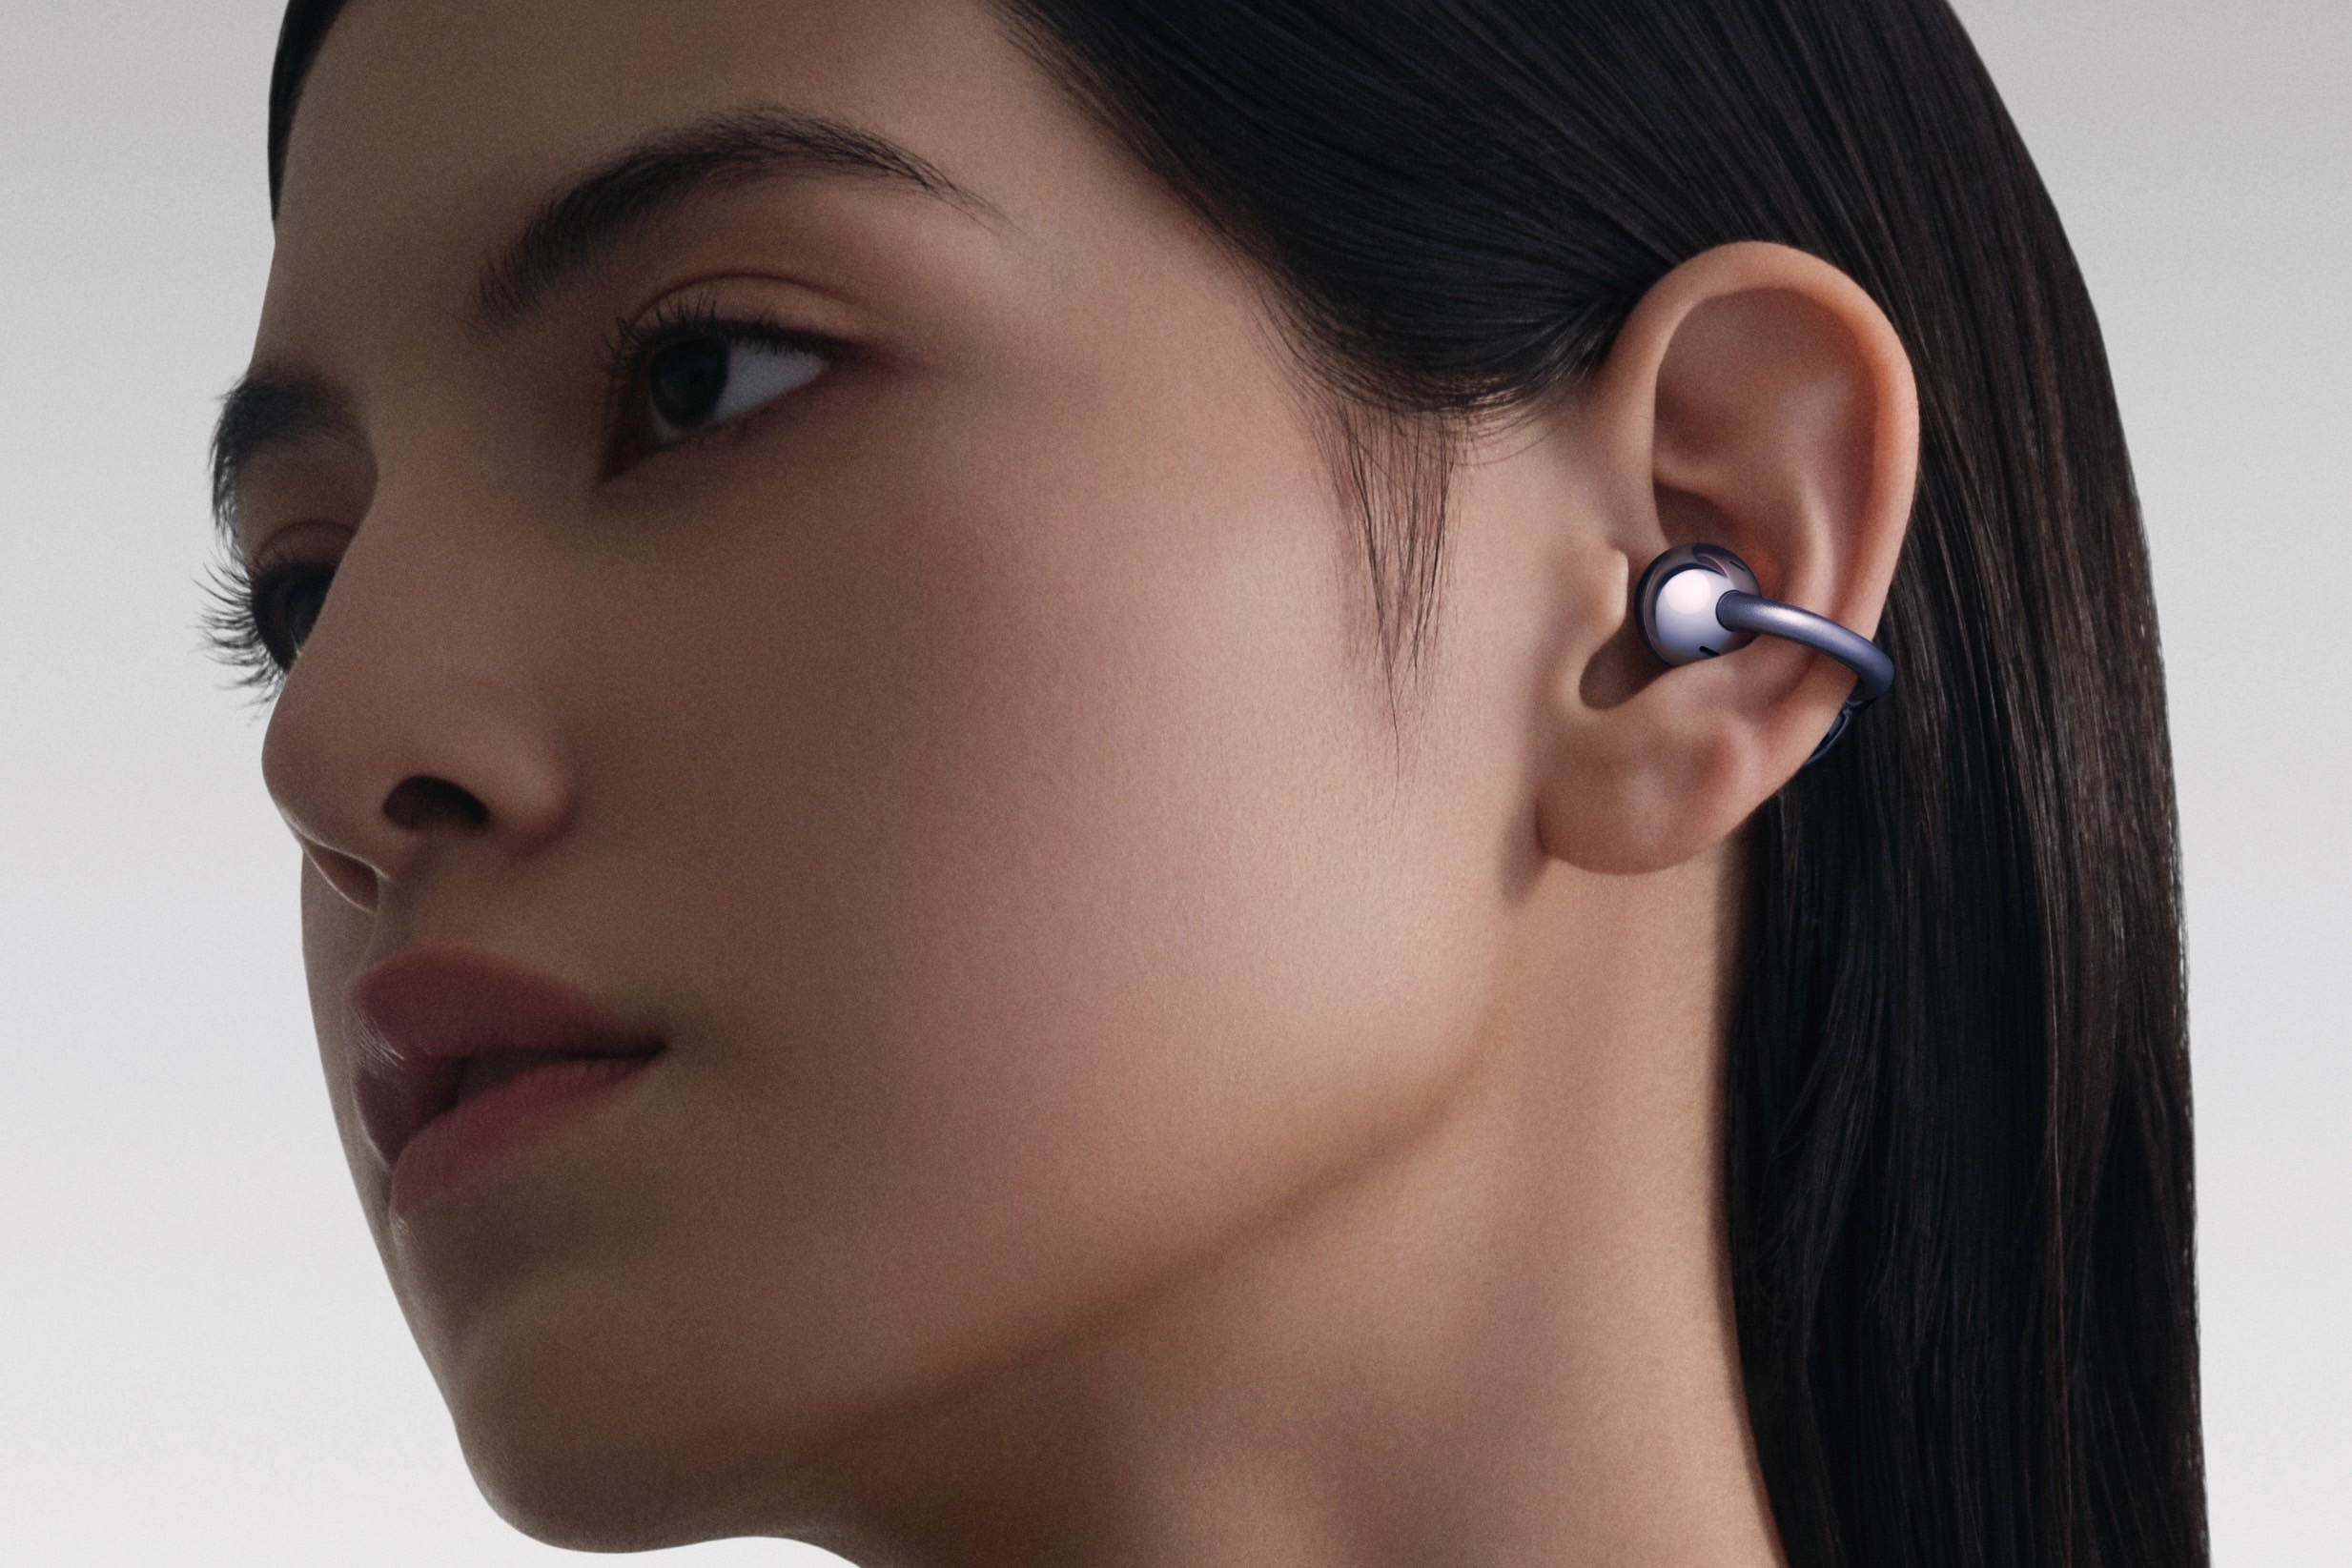 HUAWEI FreeClip launched: Ever seen earbuds like these before